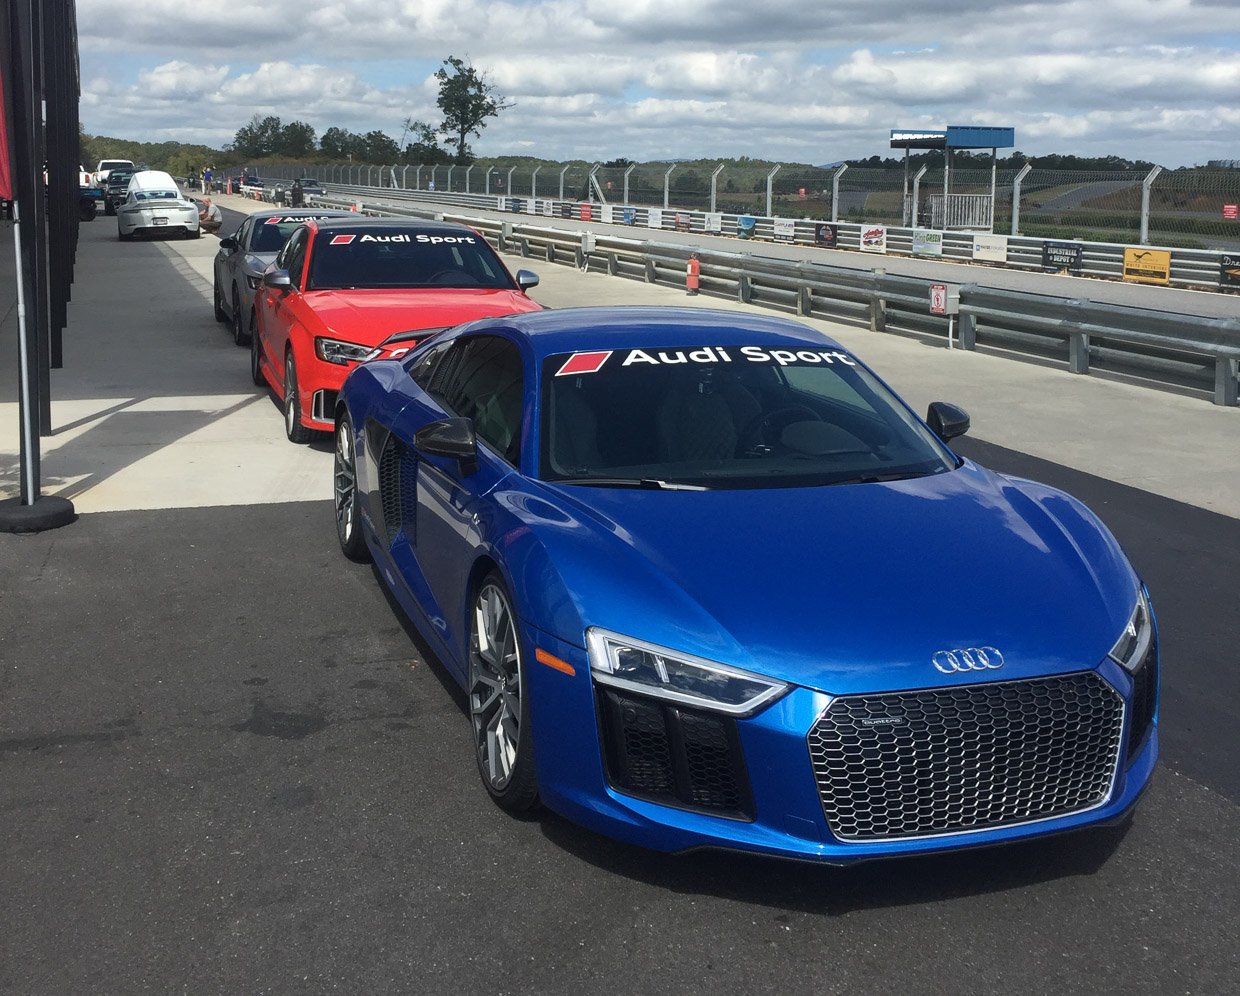 A Day at the Track with Audi Sport